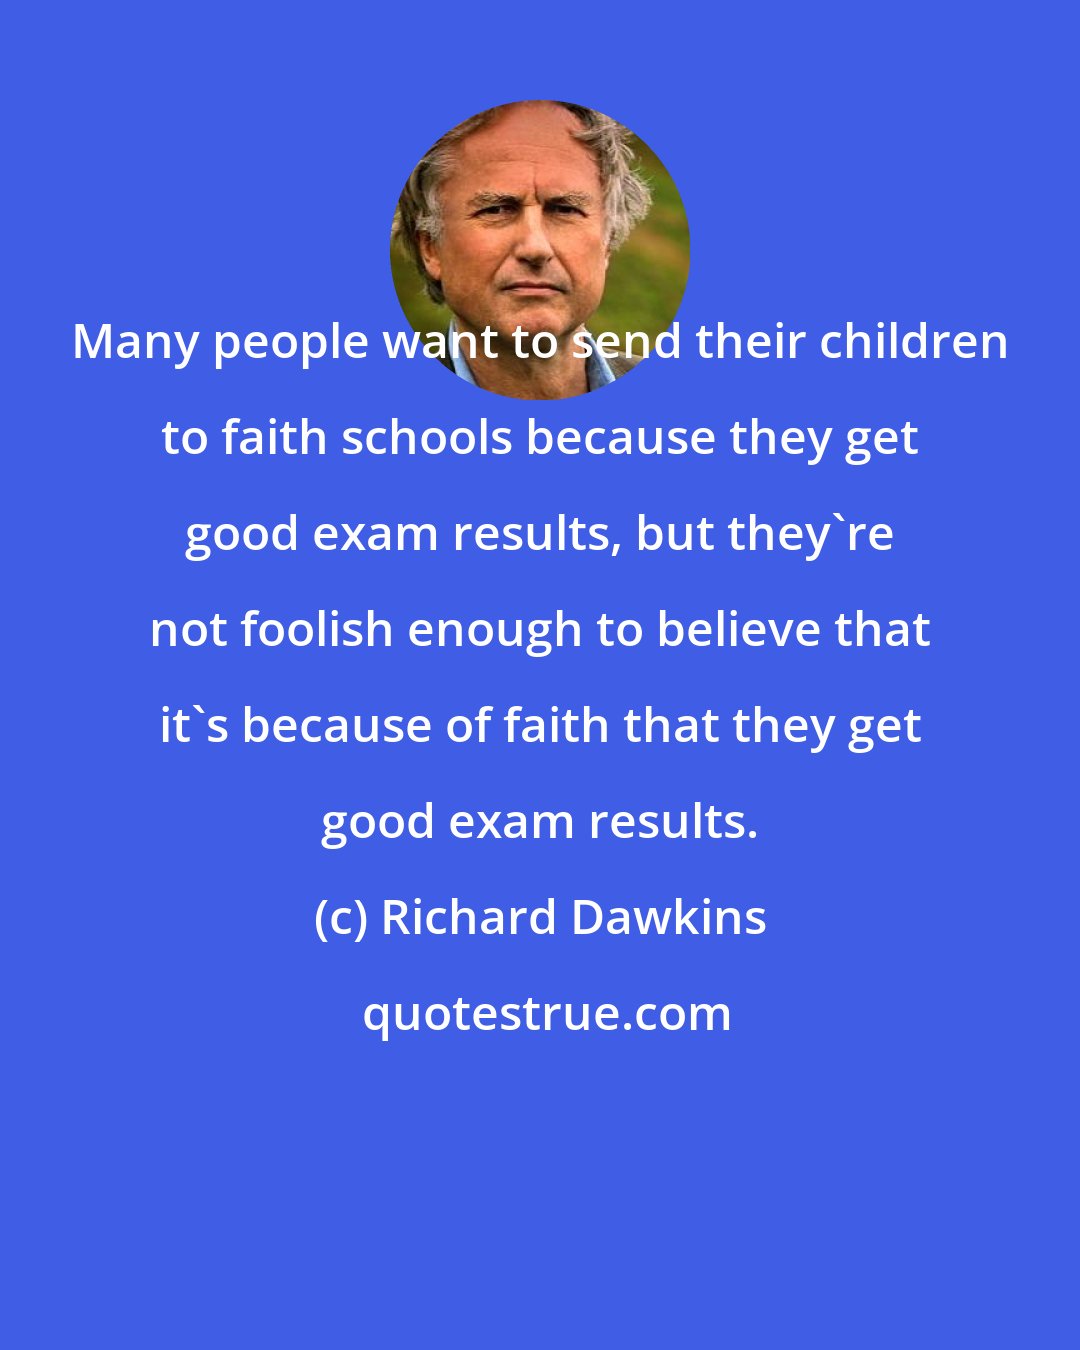 Richard Dawkins: Many people want to send their children to faith schools because they get good exam results, but they're not foolish enough to believe that it's because of faith that they get good exam results.